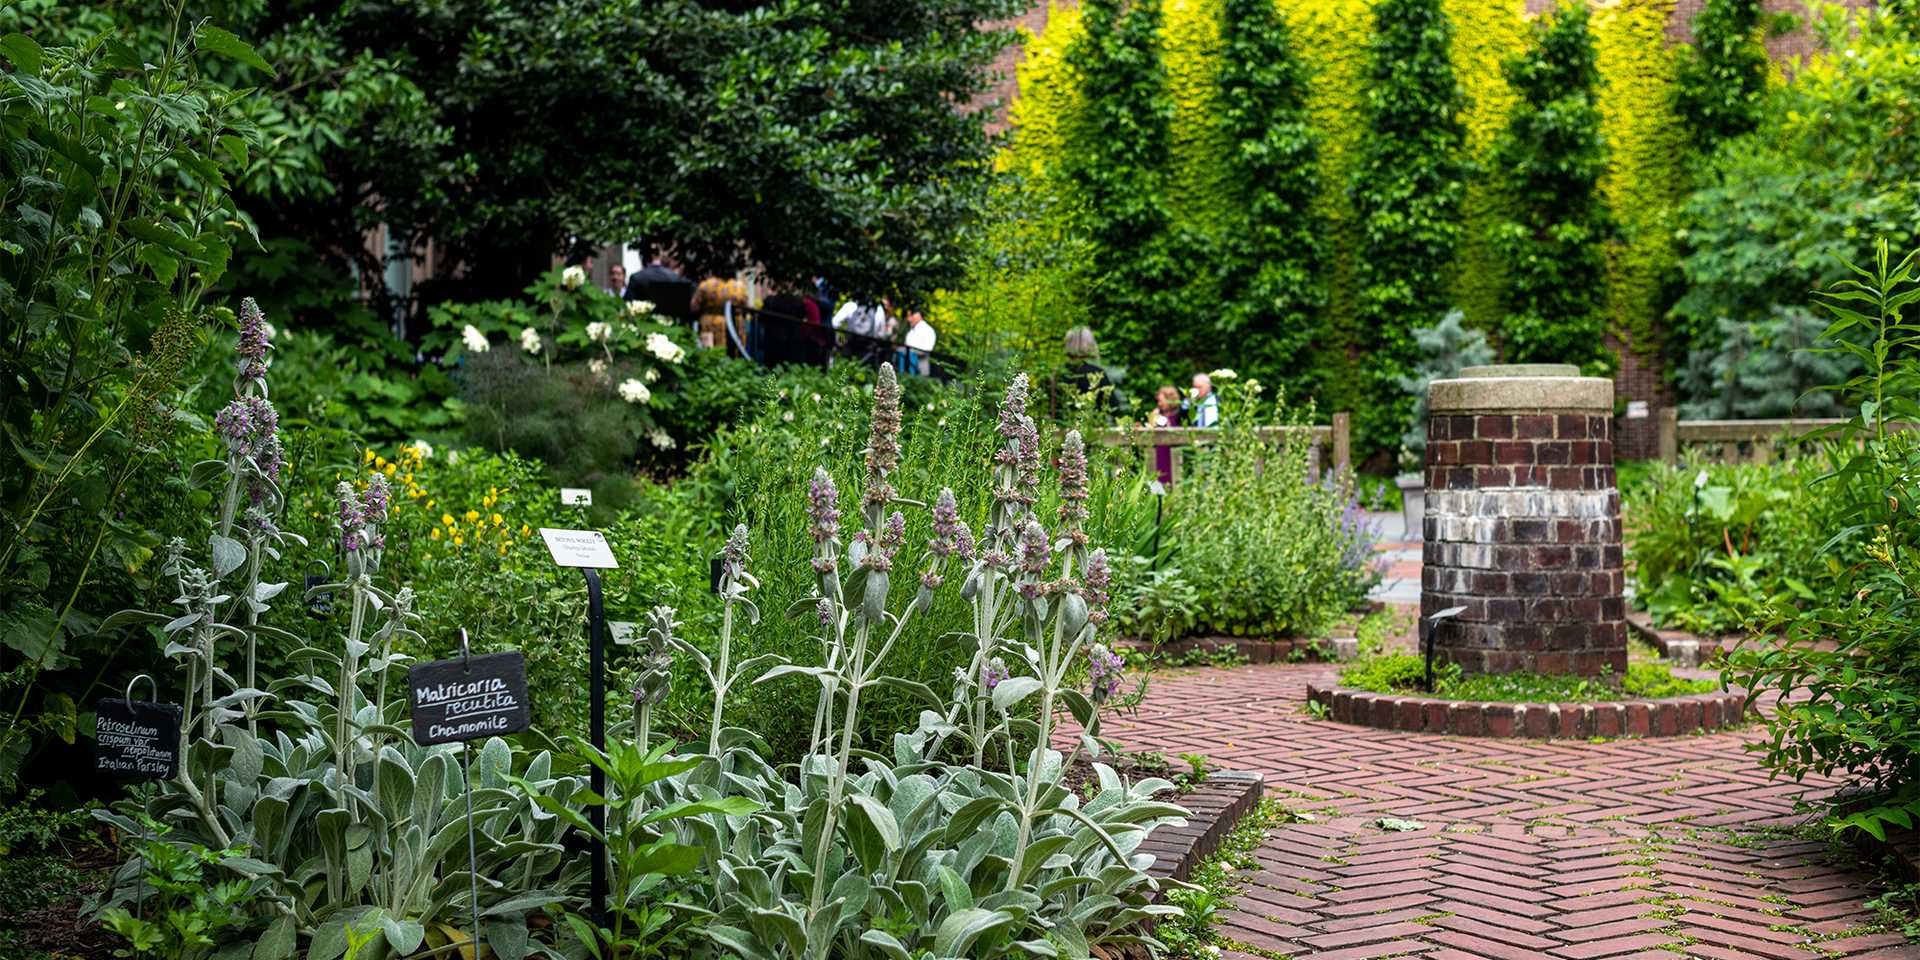 View of garden with flowers and trees with a brick walkway 